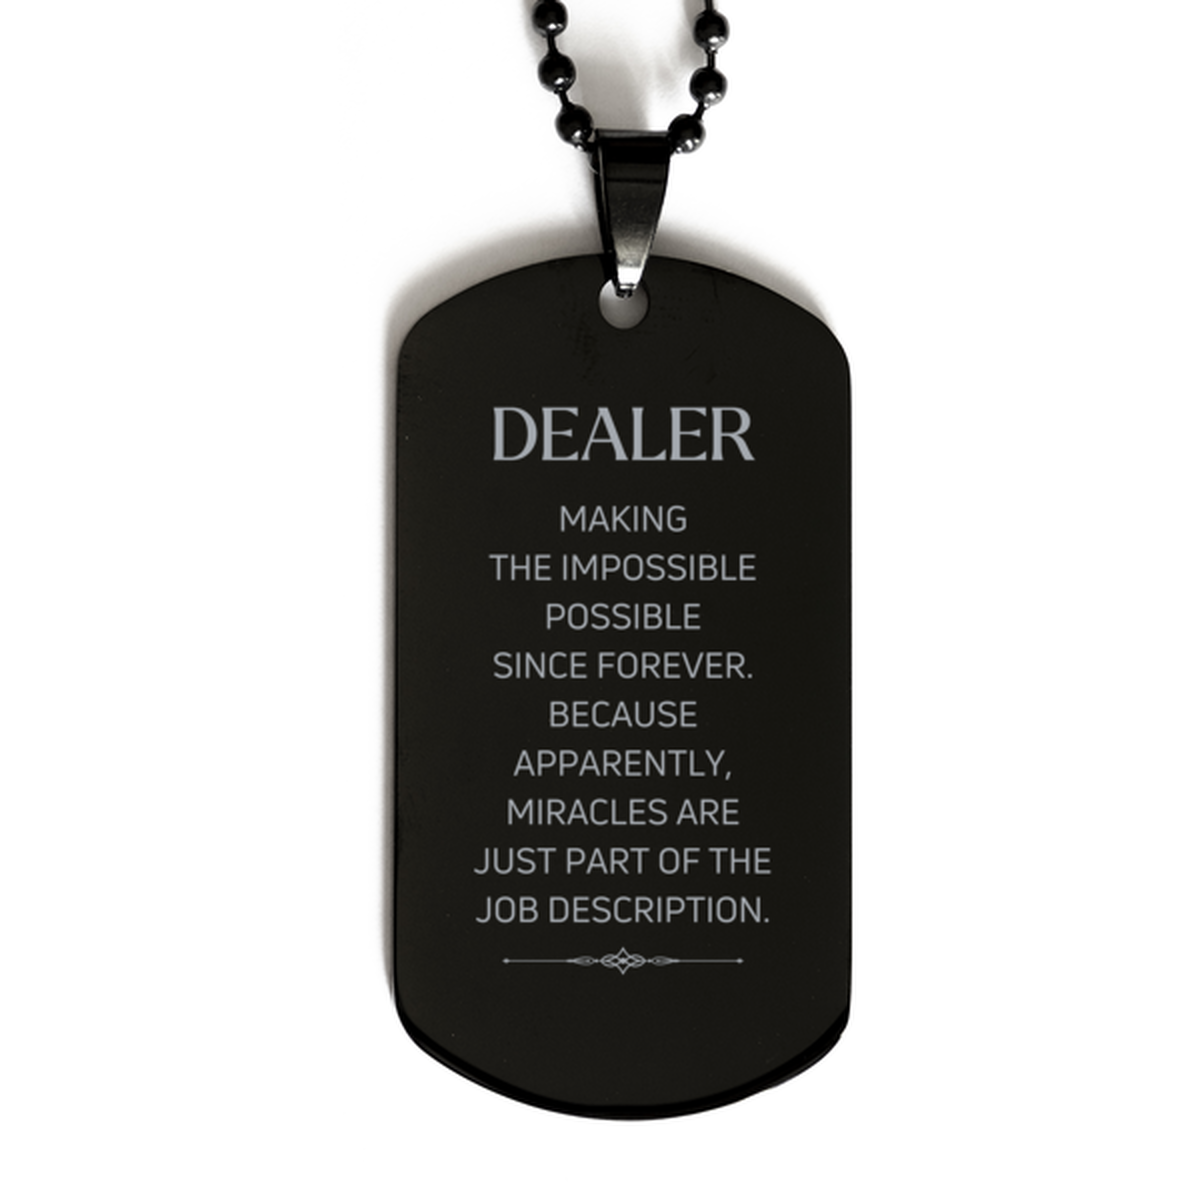 Funny Dealer Gifts, Miracles are just part of the job description, Inspirational Birthday Black Dog Tag For Dealer, Men, Women, Coworkers, Friends, Boss